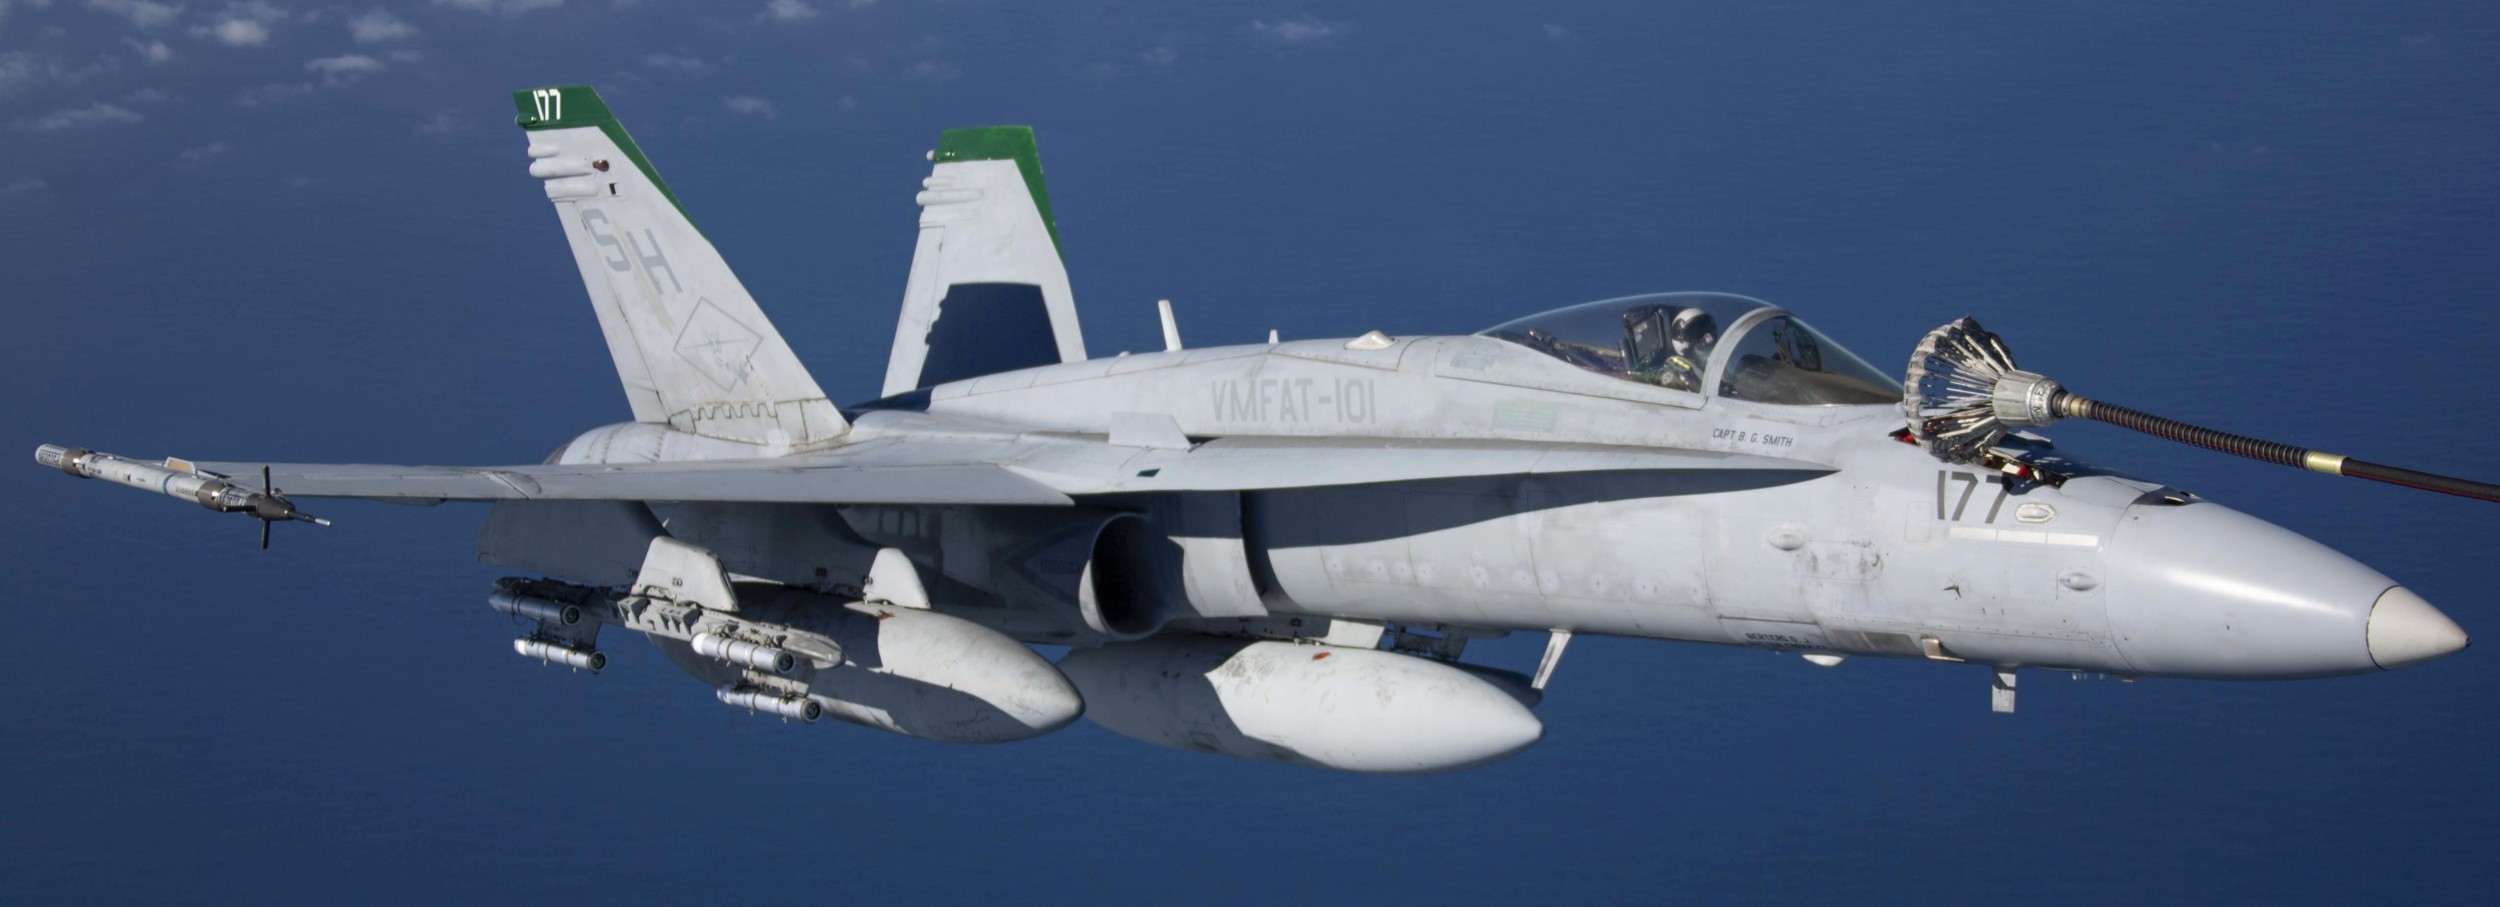 vmfat-101 sharpshooters marine fighter attack squadron usmc f/a-18 hornet replacement 99 exercise winter fury